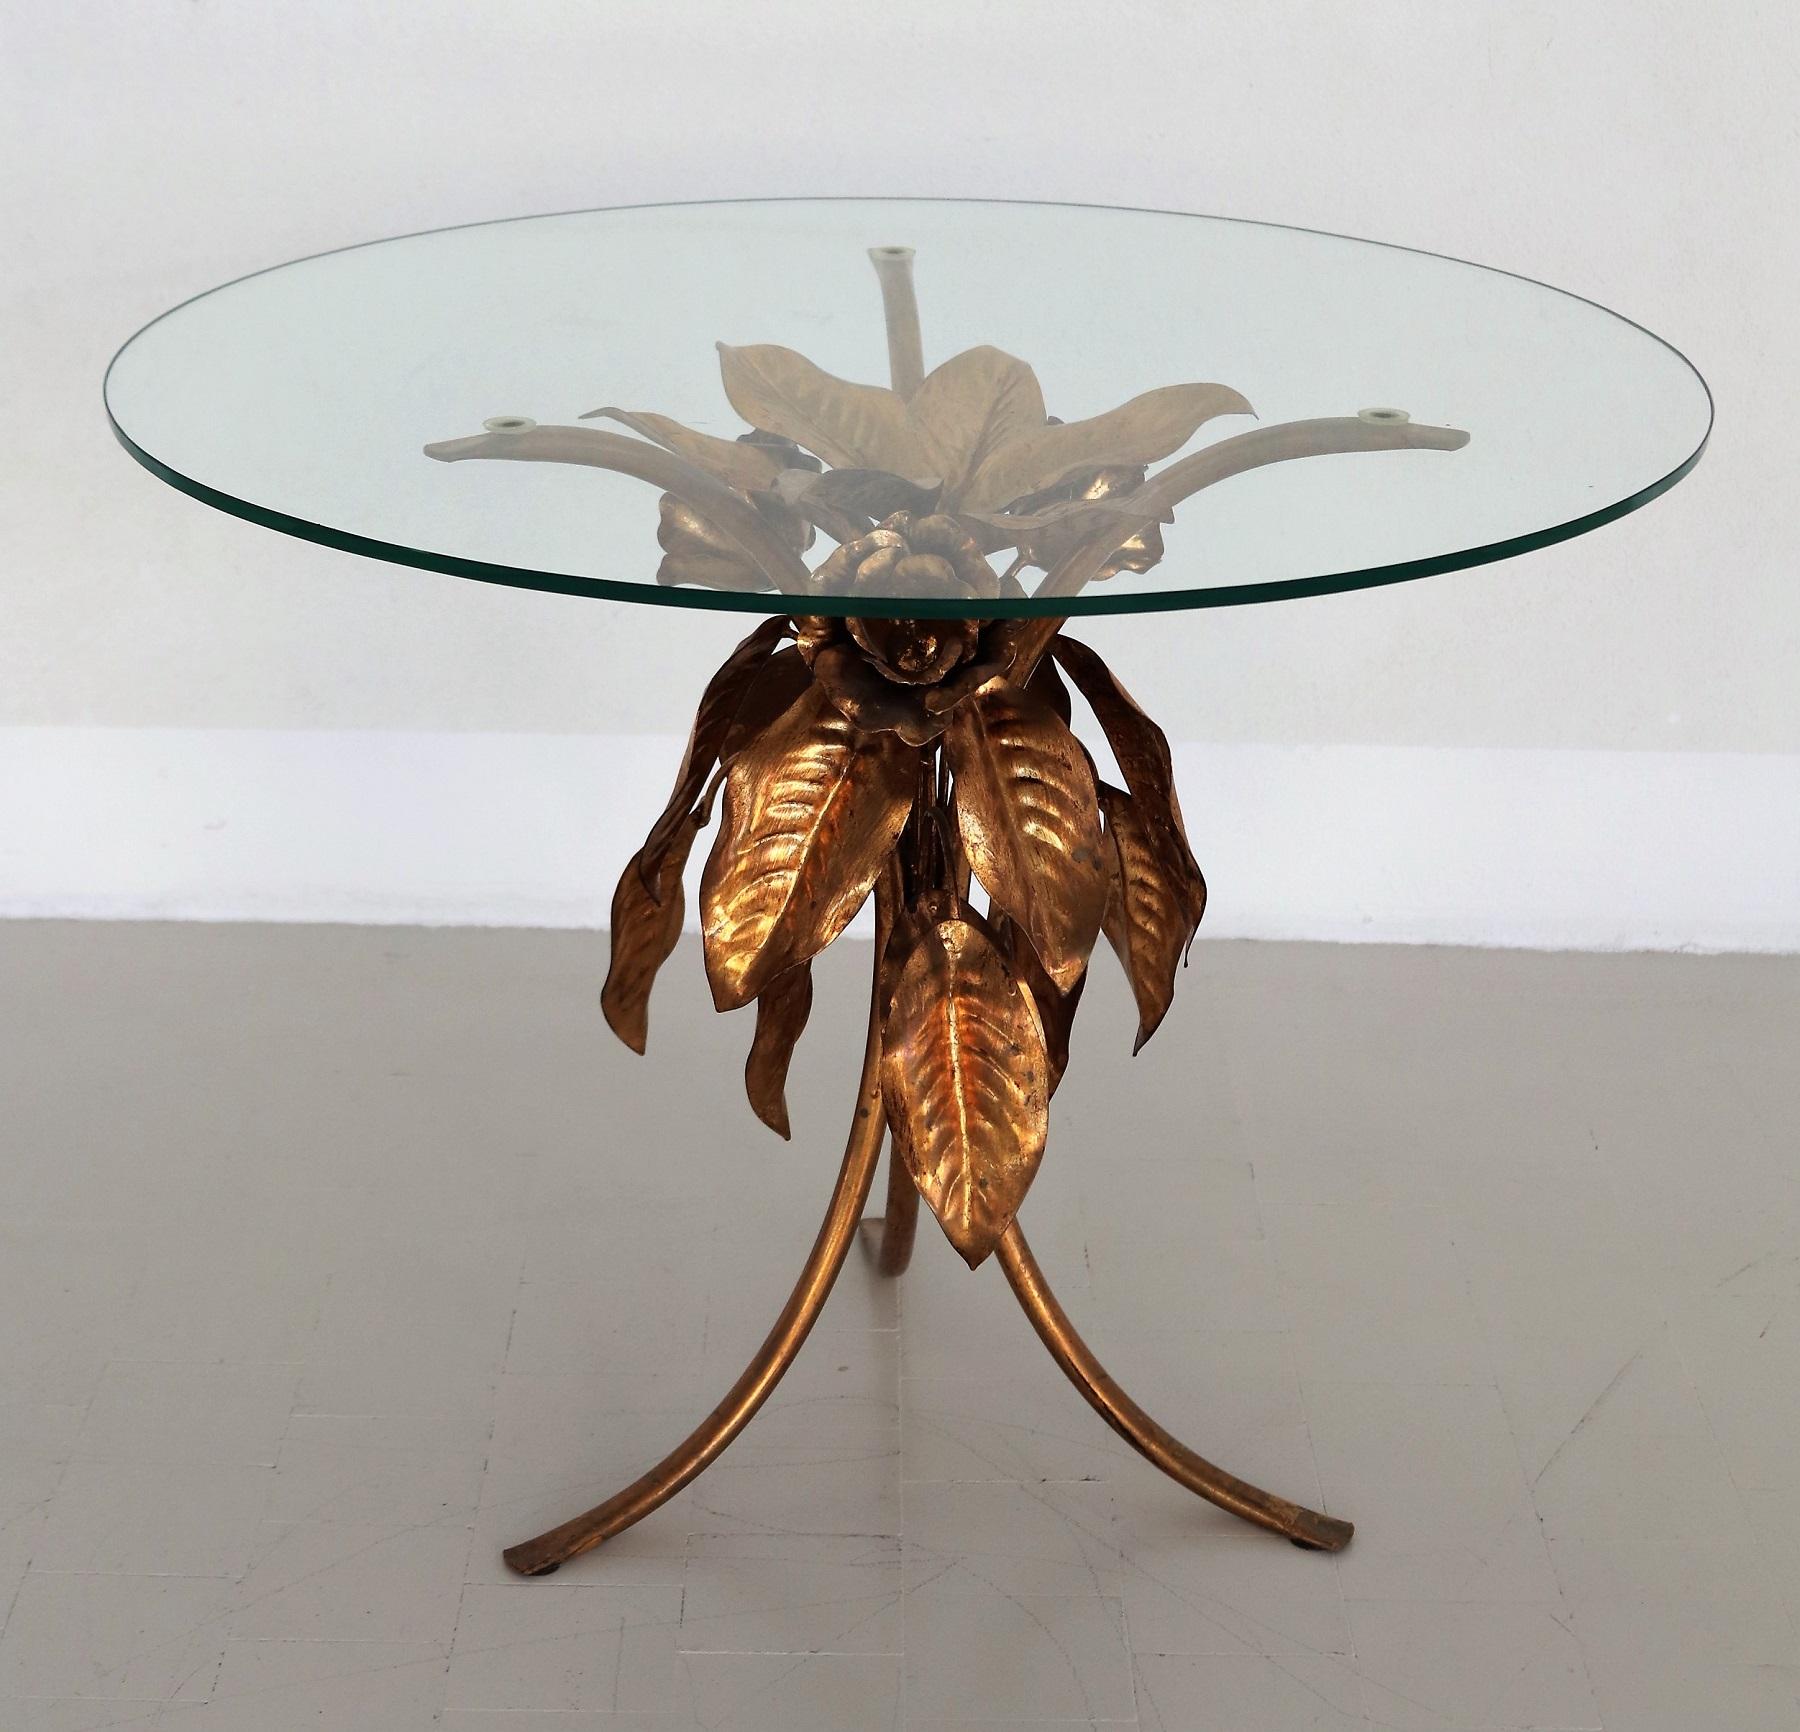 Beautiful coffee table made of solid gilt leaves and flowers in the Hollywood Regency style.
Made from German designer and manufacturer Hans Kögl in the 1960s-beginning of the 1970s.
With round glass top in very good condition, no chips but normal